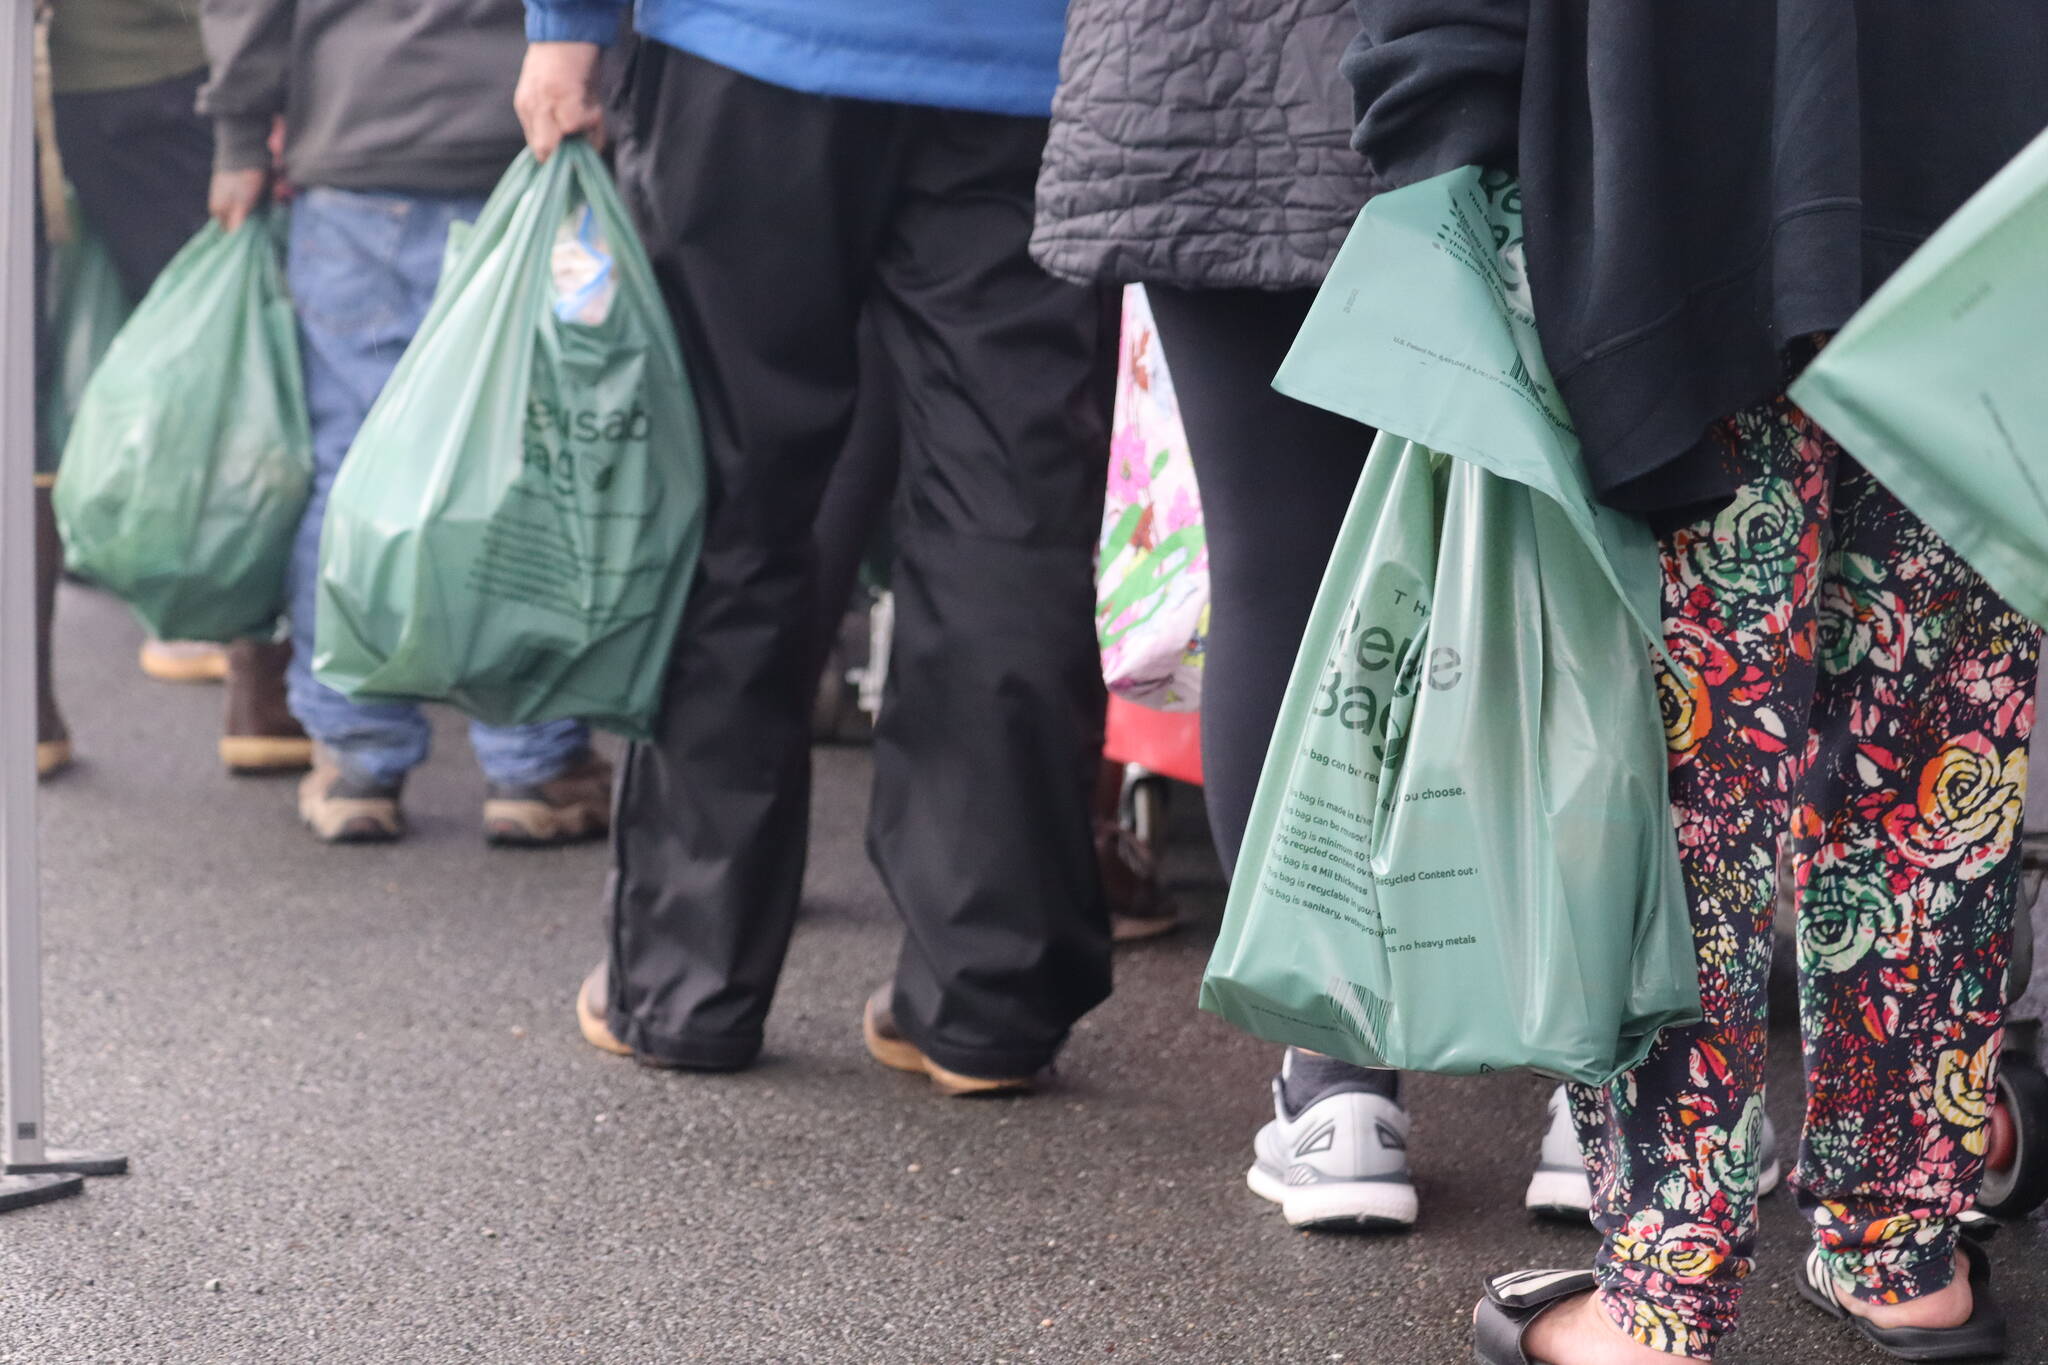 A long line of residents stand with bags in hand, digging through scarce supplies on a rainy Tuesday afternoon in Juneau at the Southeast Alaska Food Bank. (Jonson Kuhn / Juneau Empire)